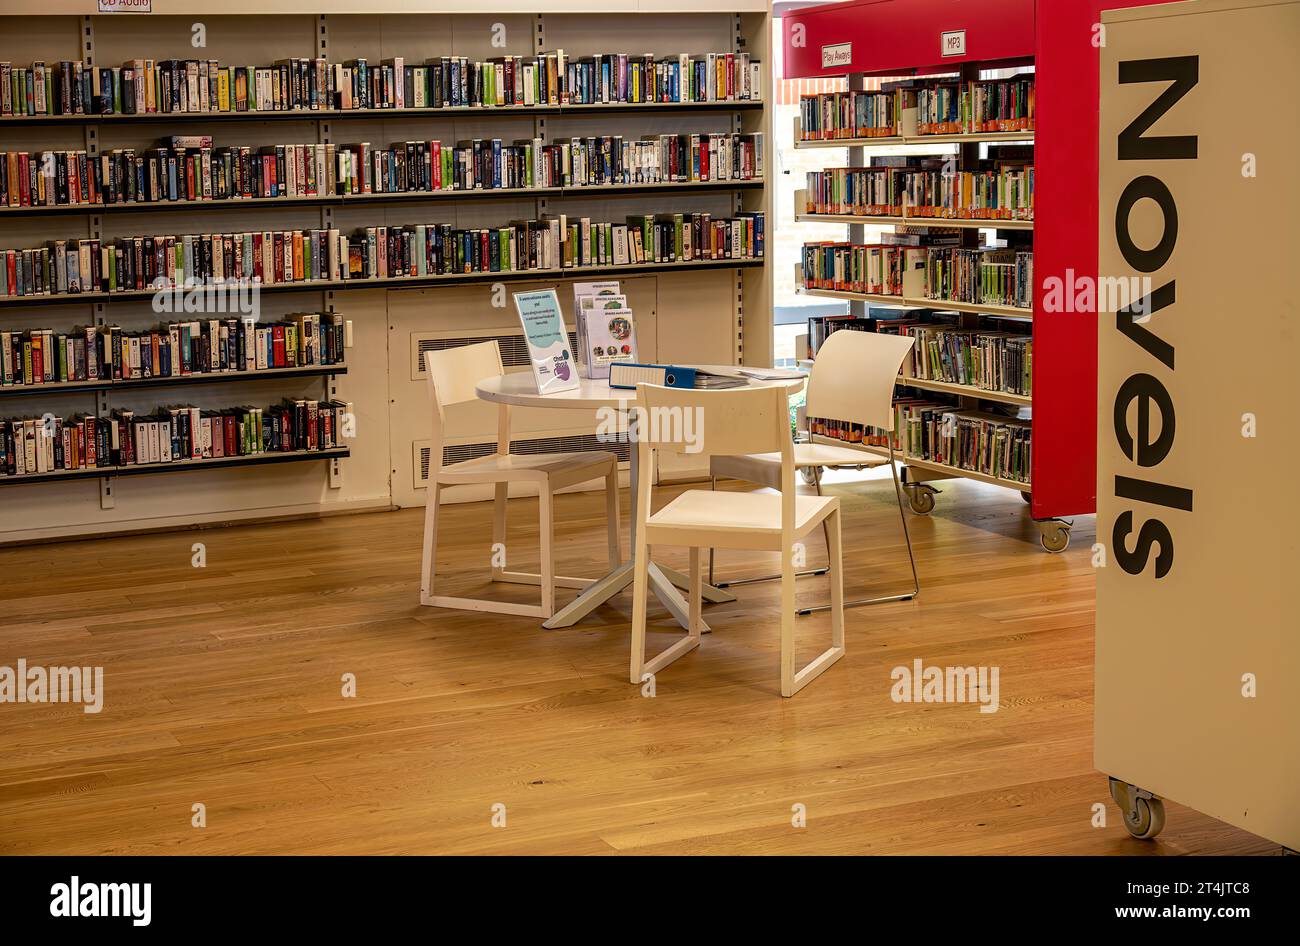 Colourful book shelves in a public library Stock Photo